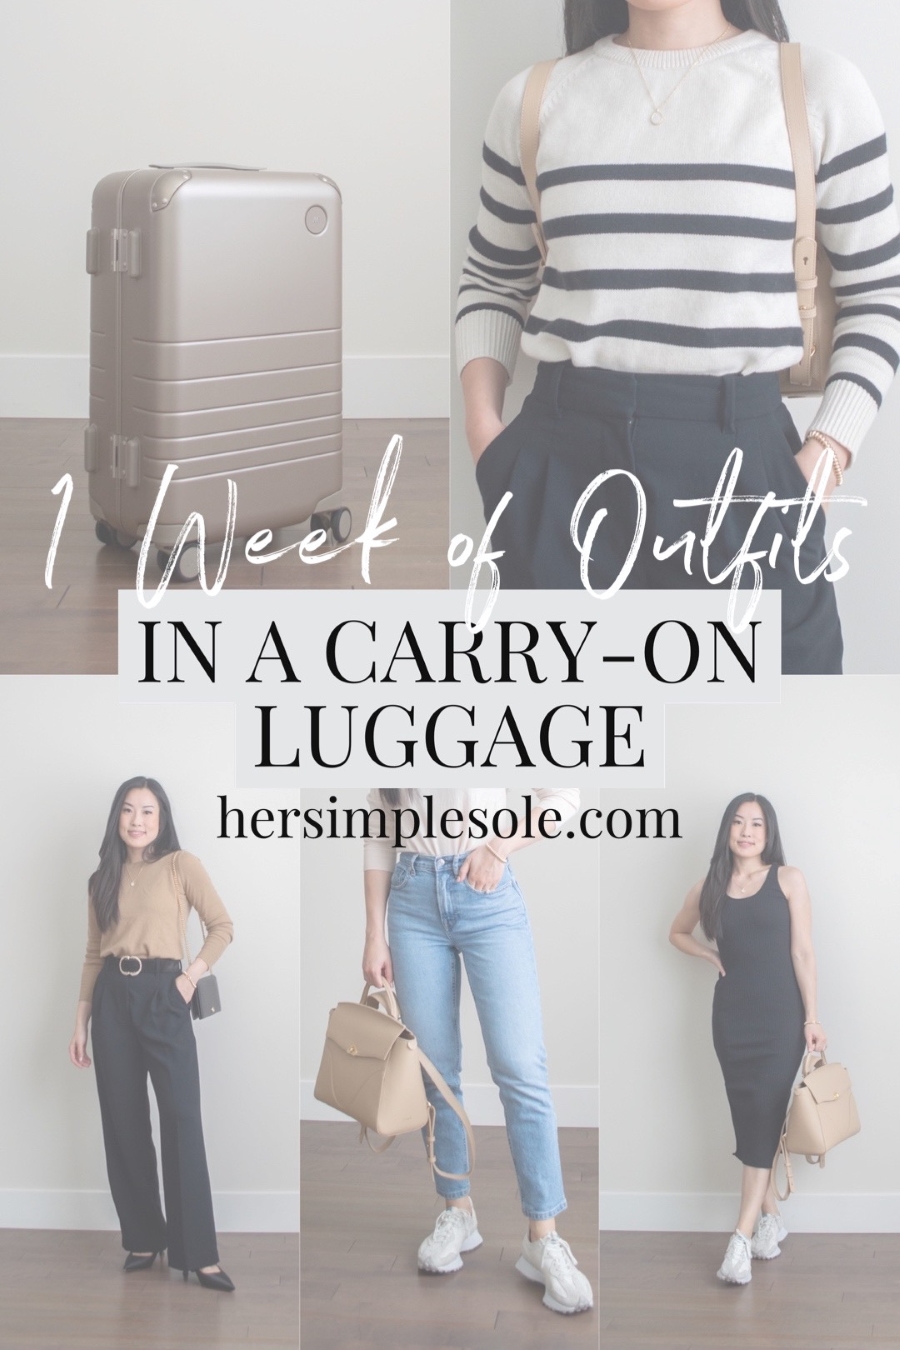 https://hersimplesole.com/wp-content/uploads/2022/11/Her-Simple-Sole-1-Week-of-Outfits-in-a-Carry-On-Luggage-34.jpg